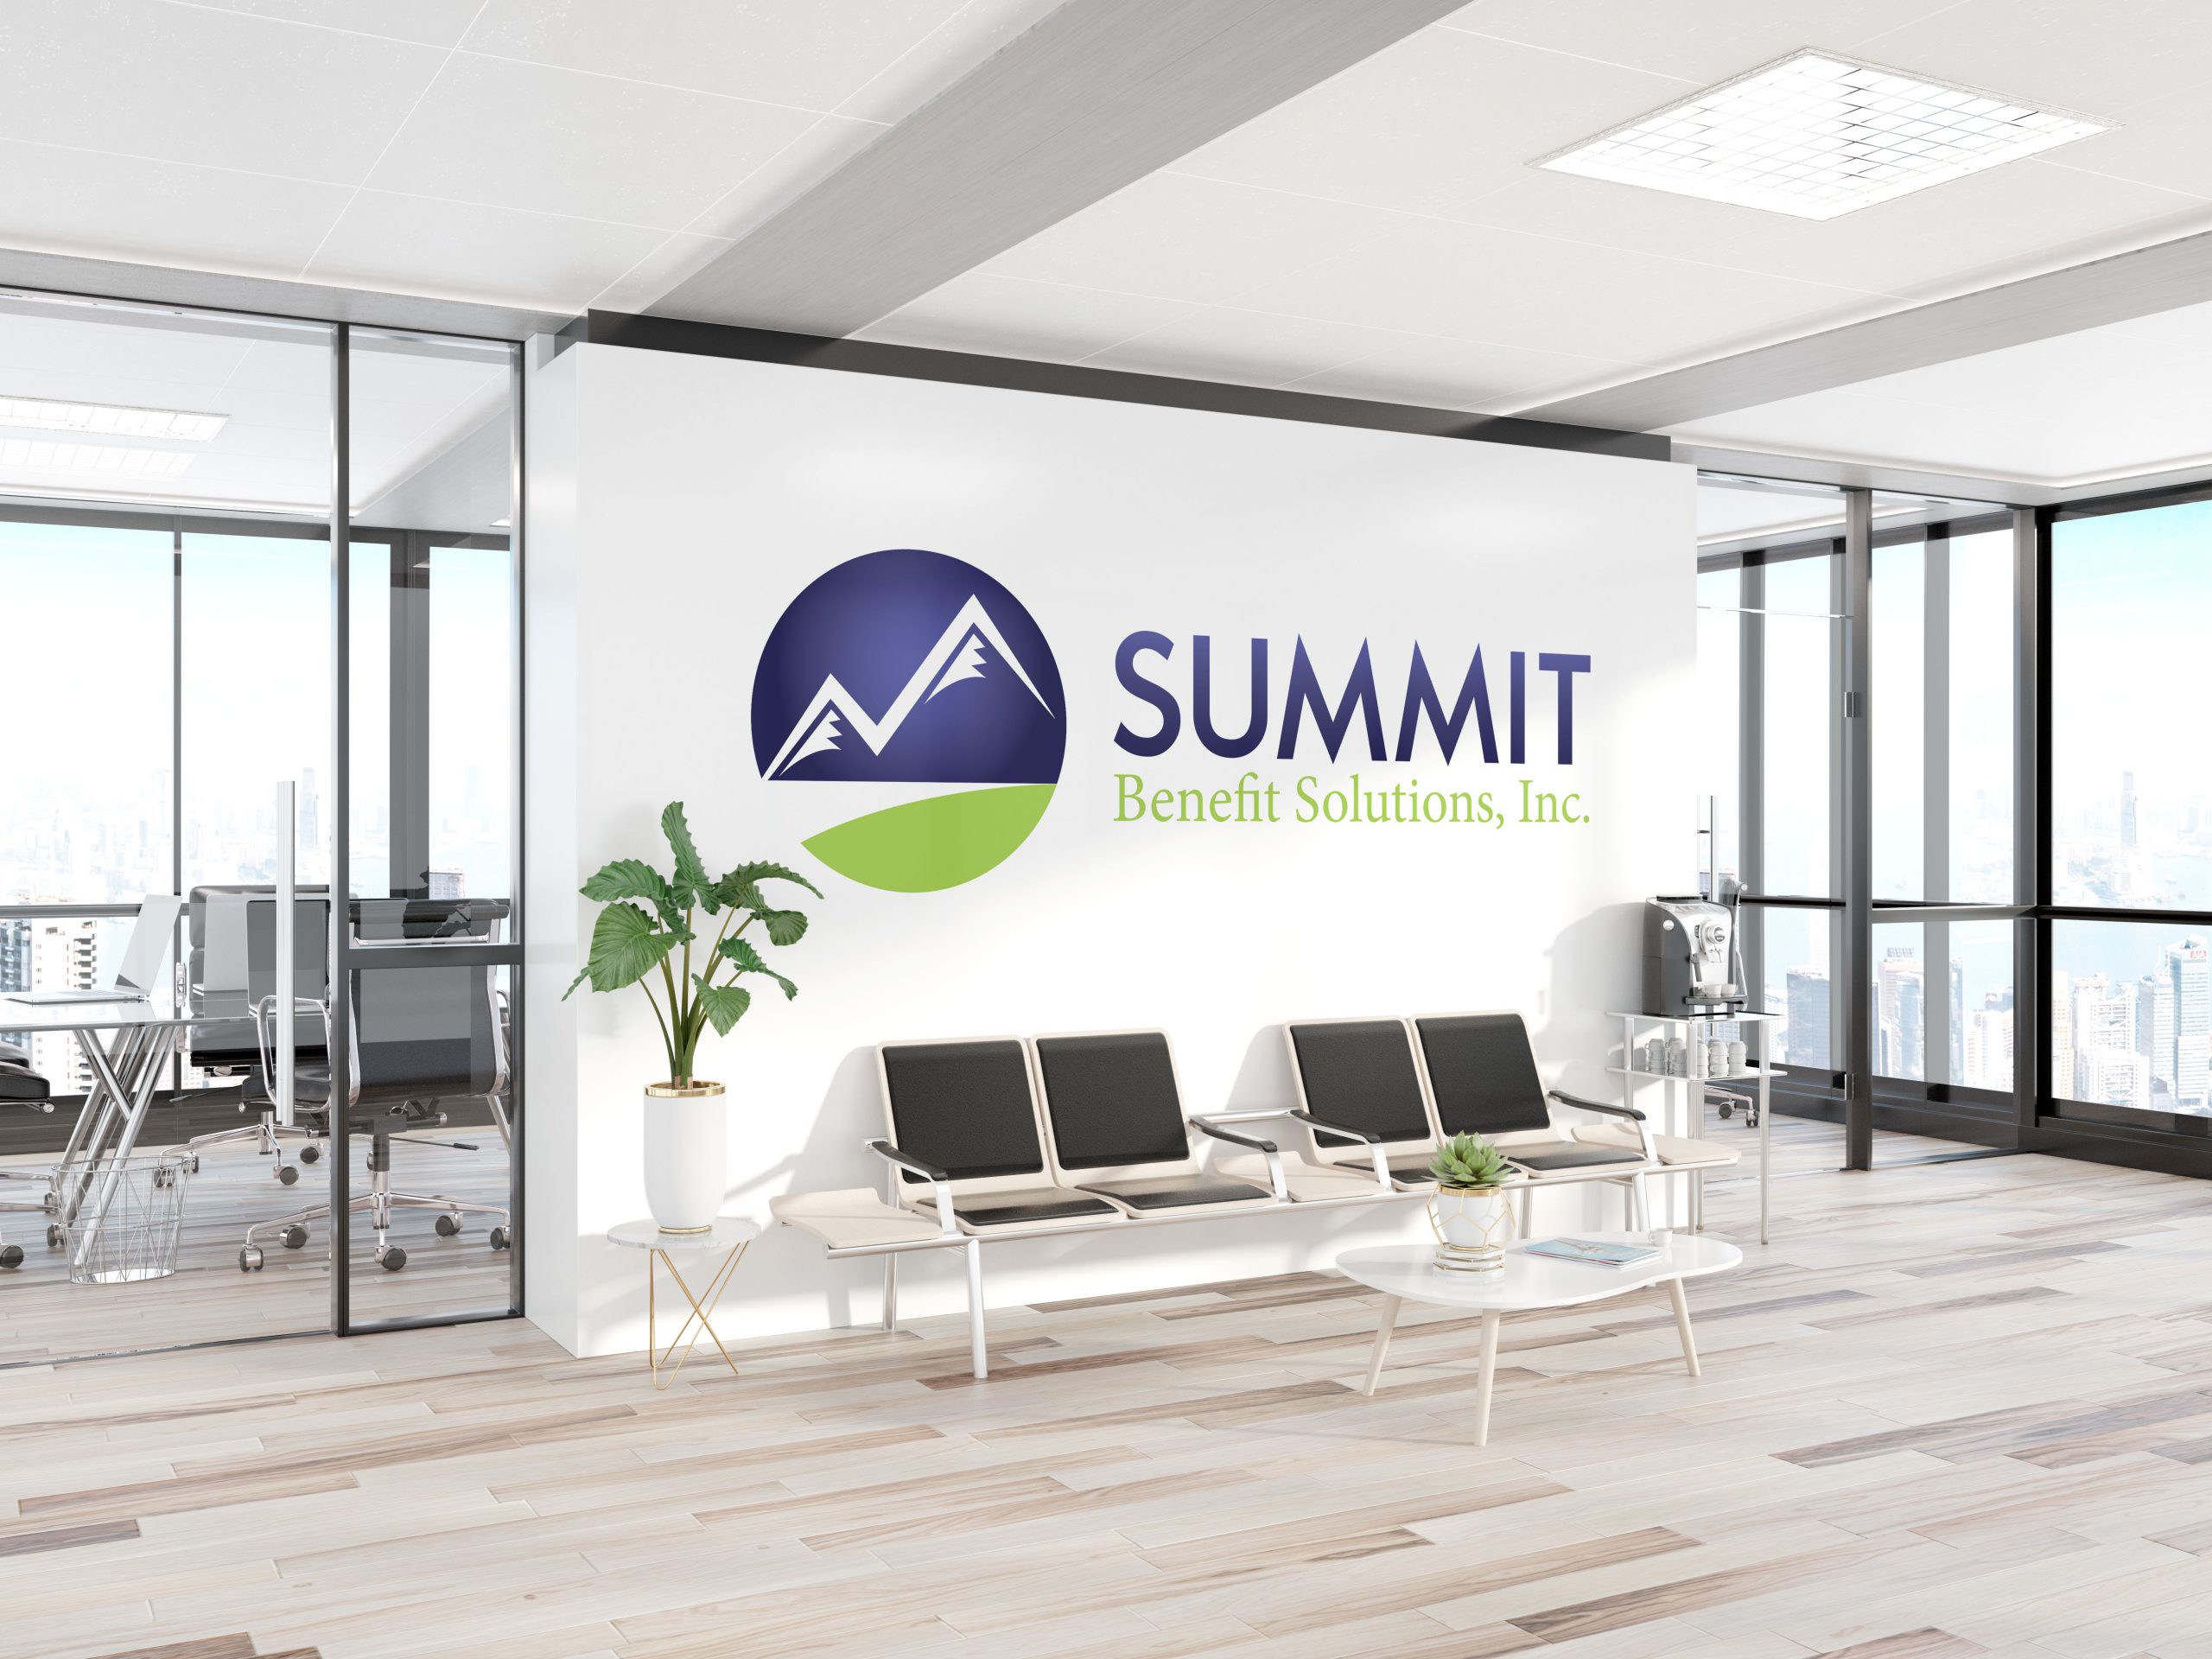 Summit logo decal decorating a large office wall